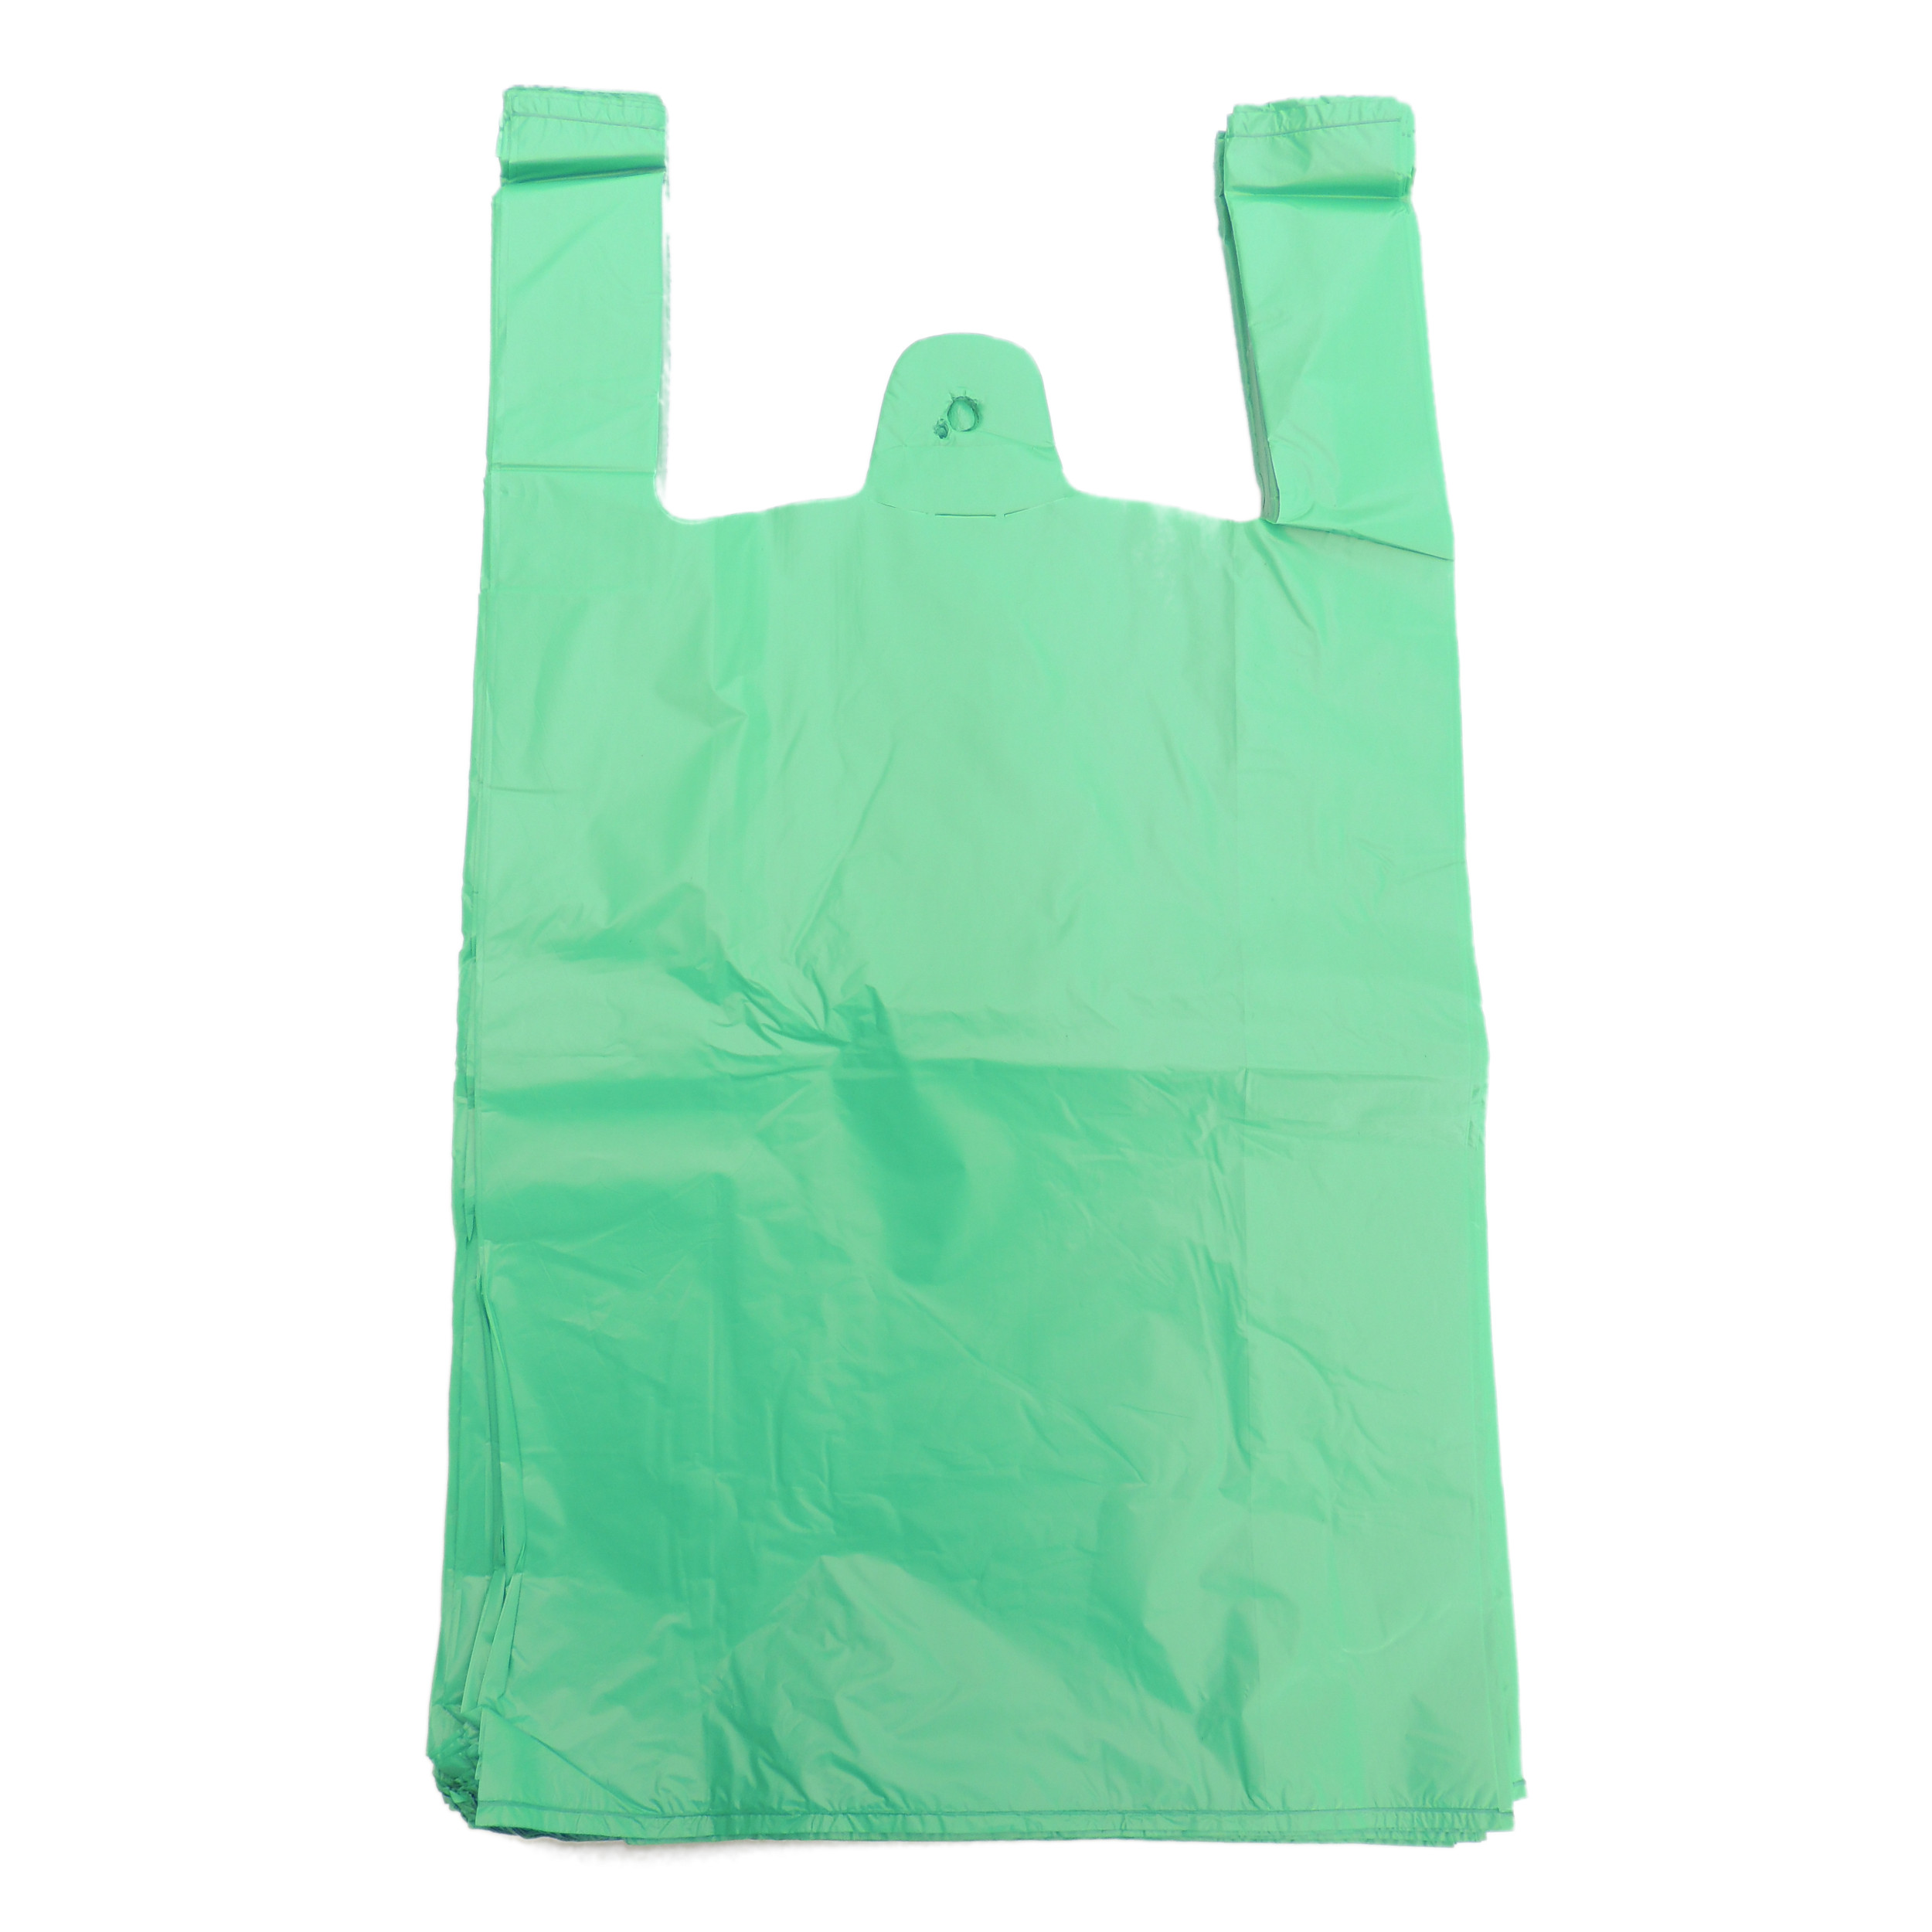 Recycled Carrier Bags - Green - Large 4 Star - 11'' x 17'' x 21'' - 24mu (Pack of 100)